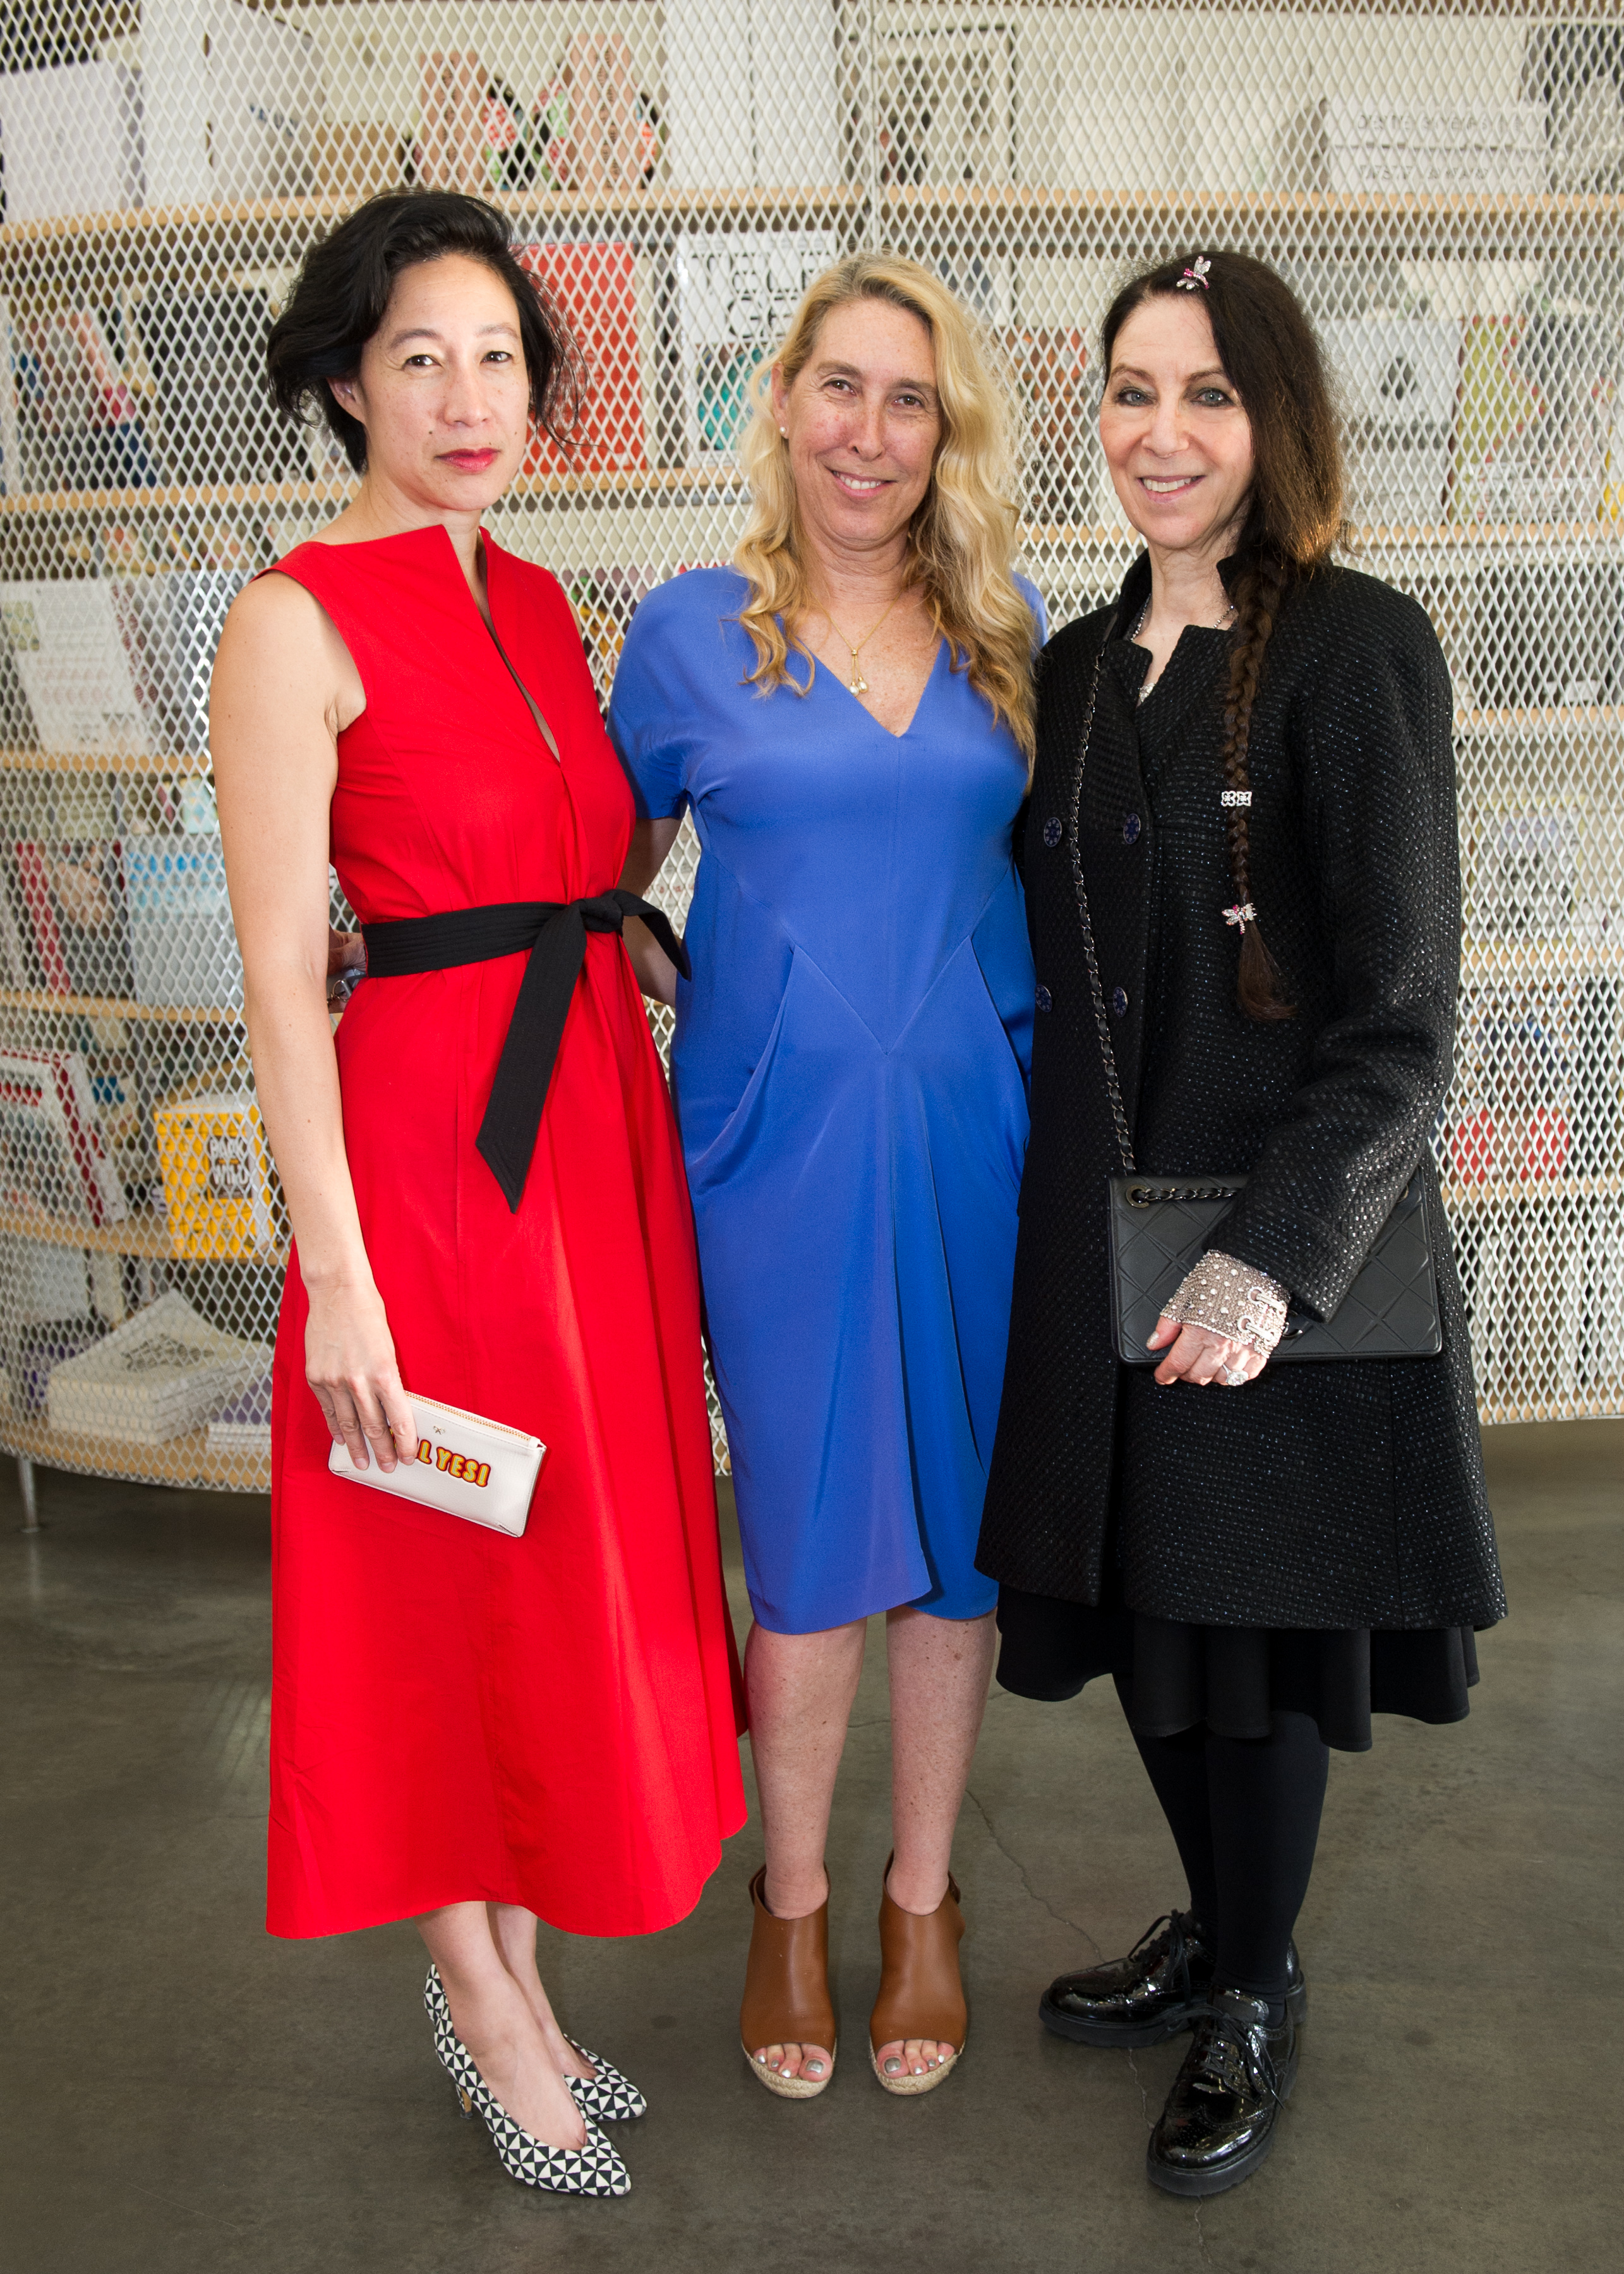 Karen Wong, Lisa Phillips and Ydessa Hendeles at the New Museum for the opening of "The Keeper." Courtesy of Madison McGaw/BFA.